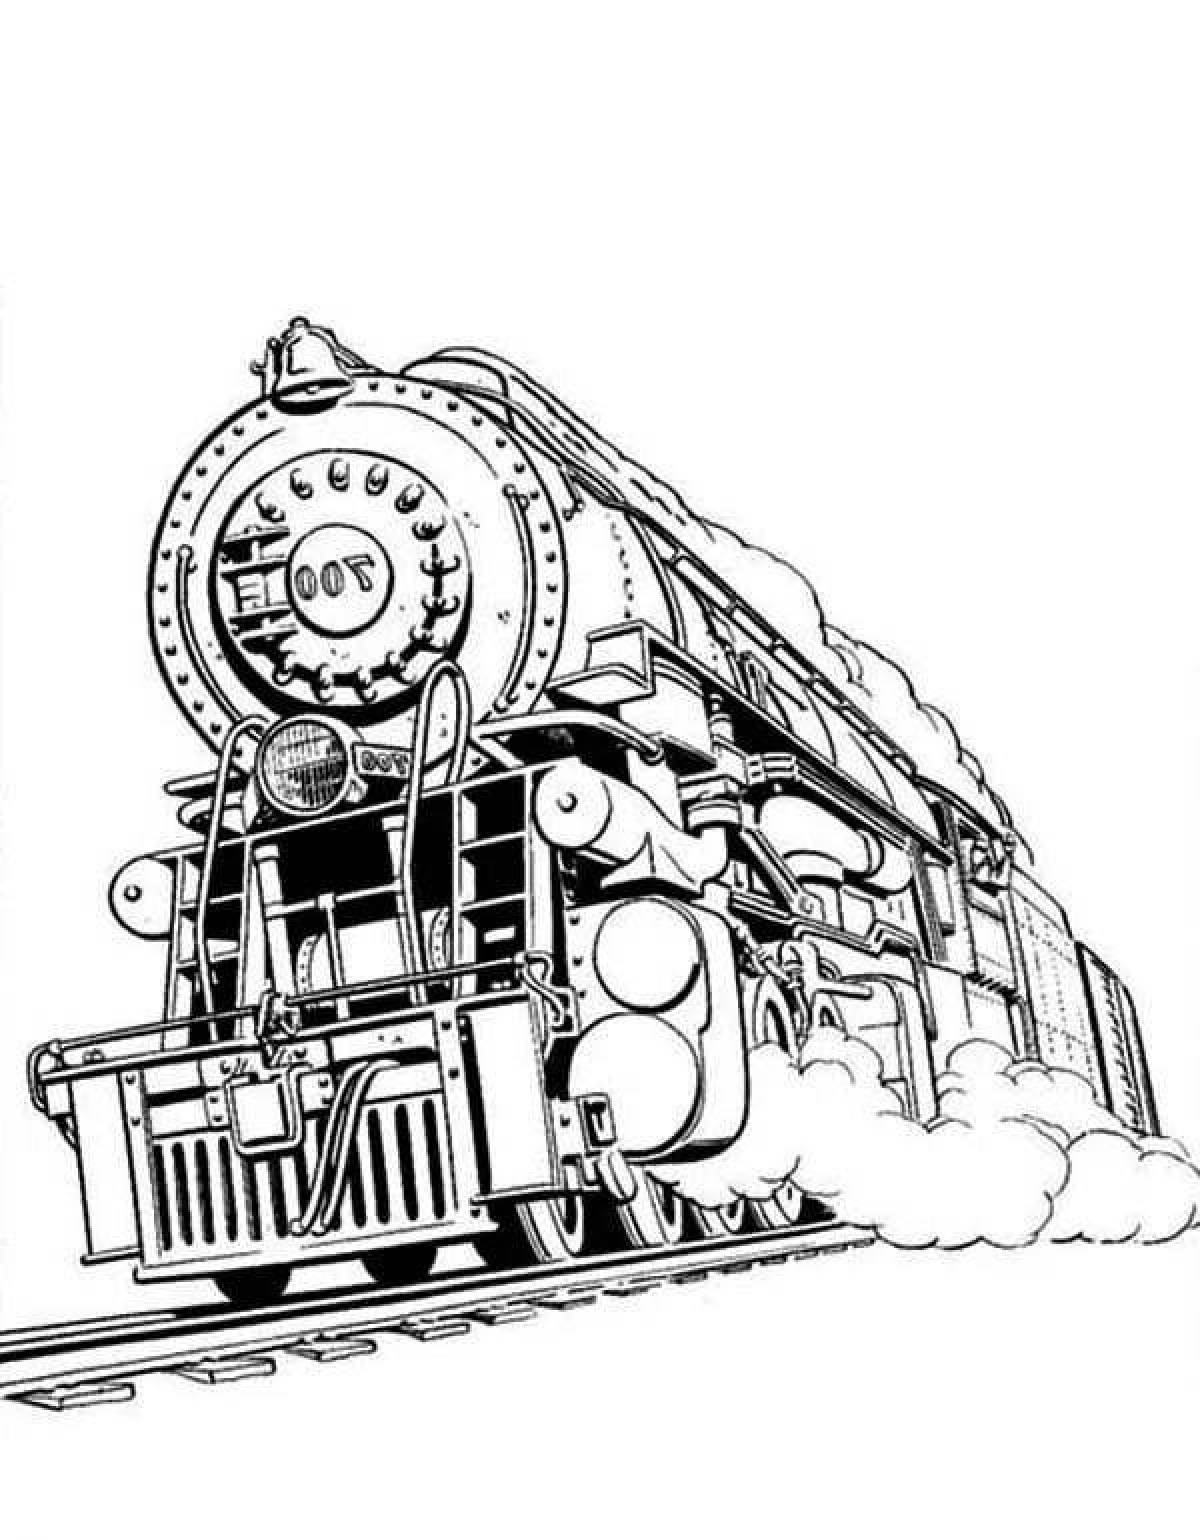 Train Eater bright coloring book